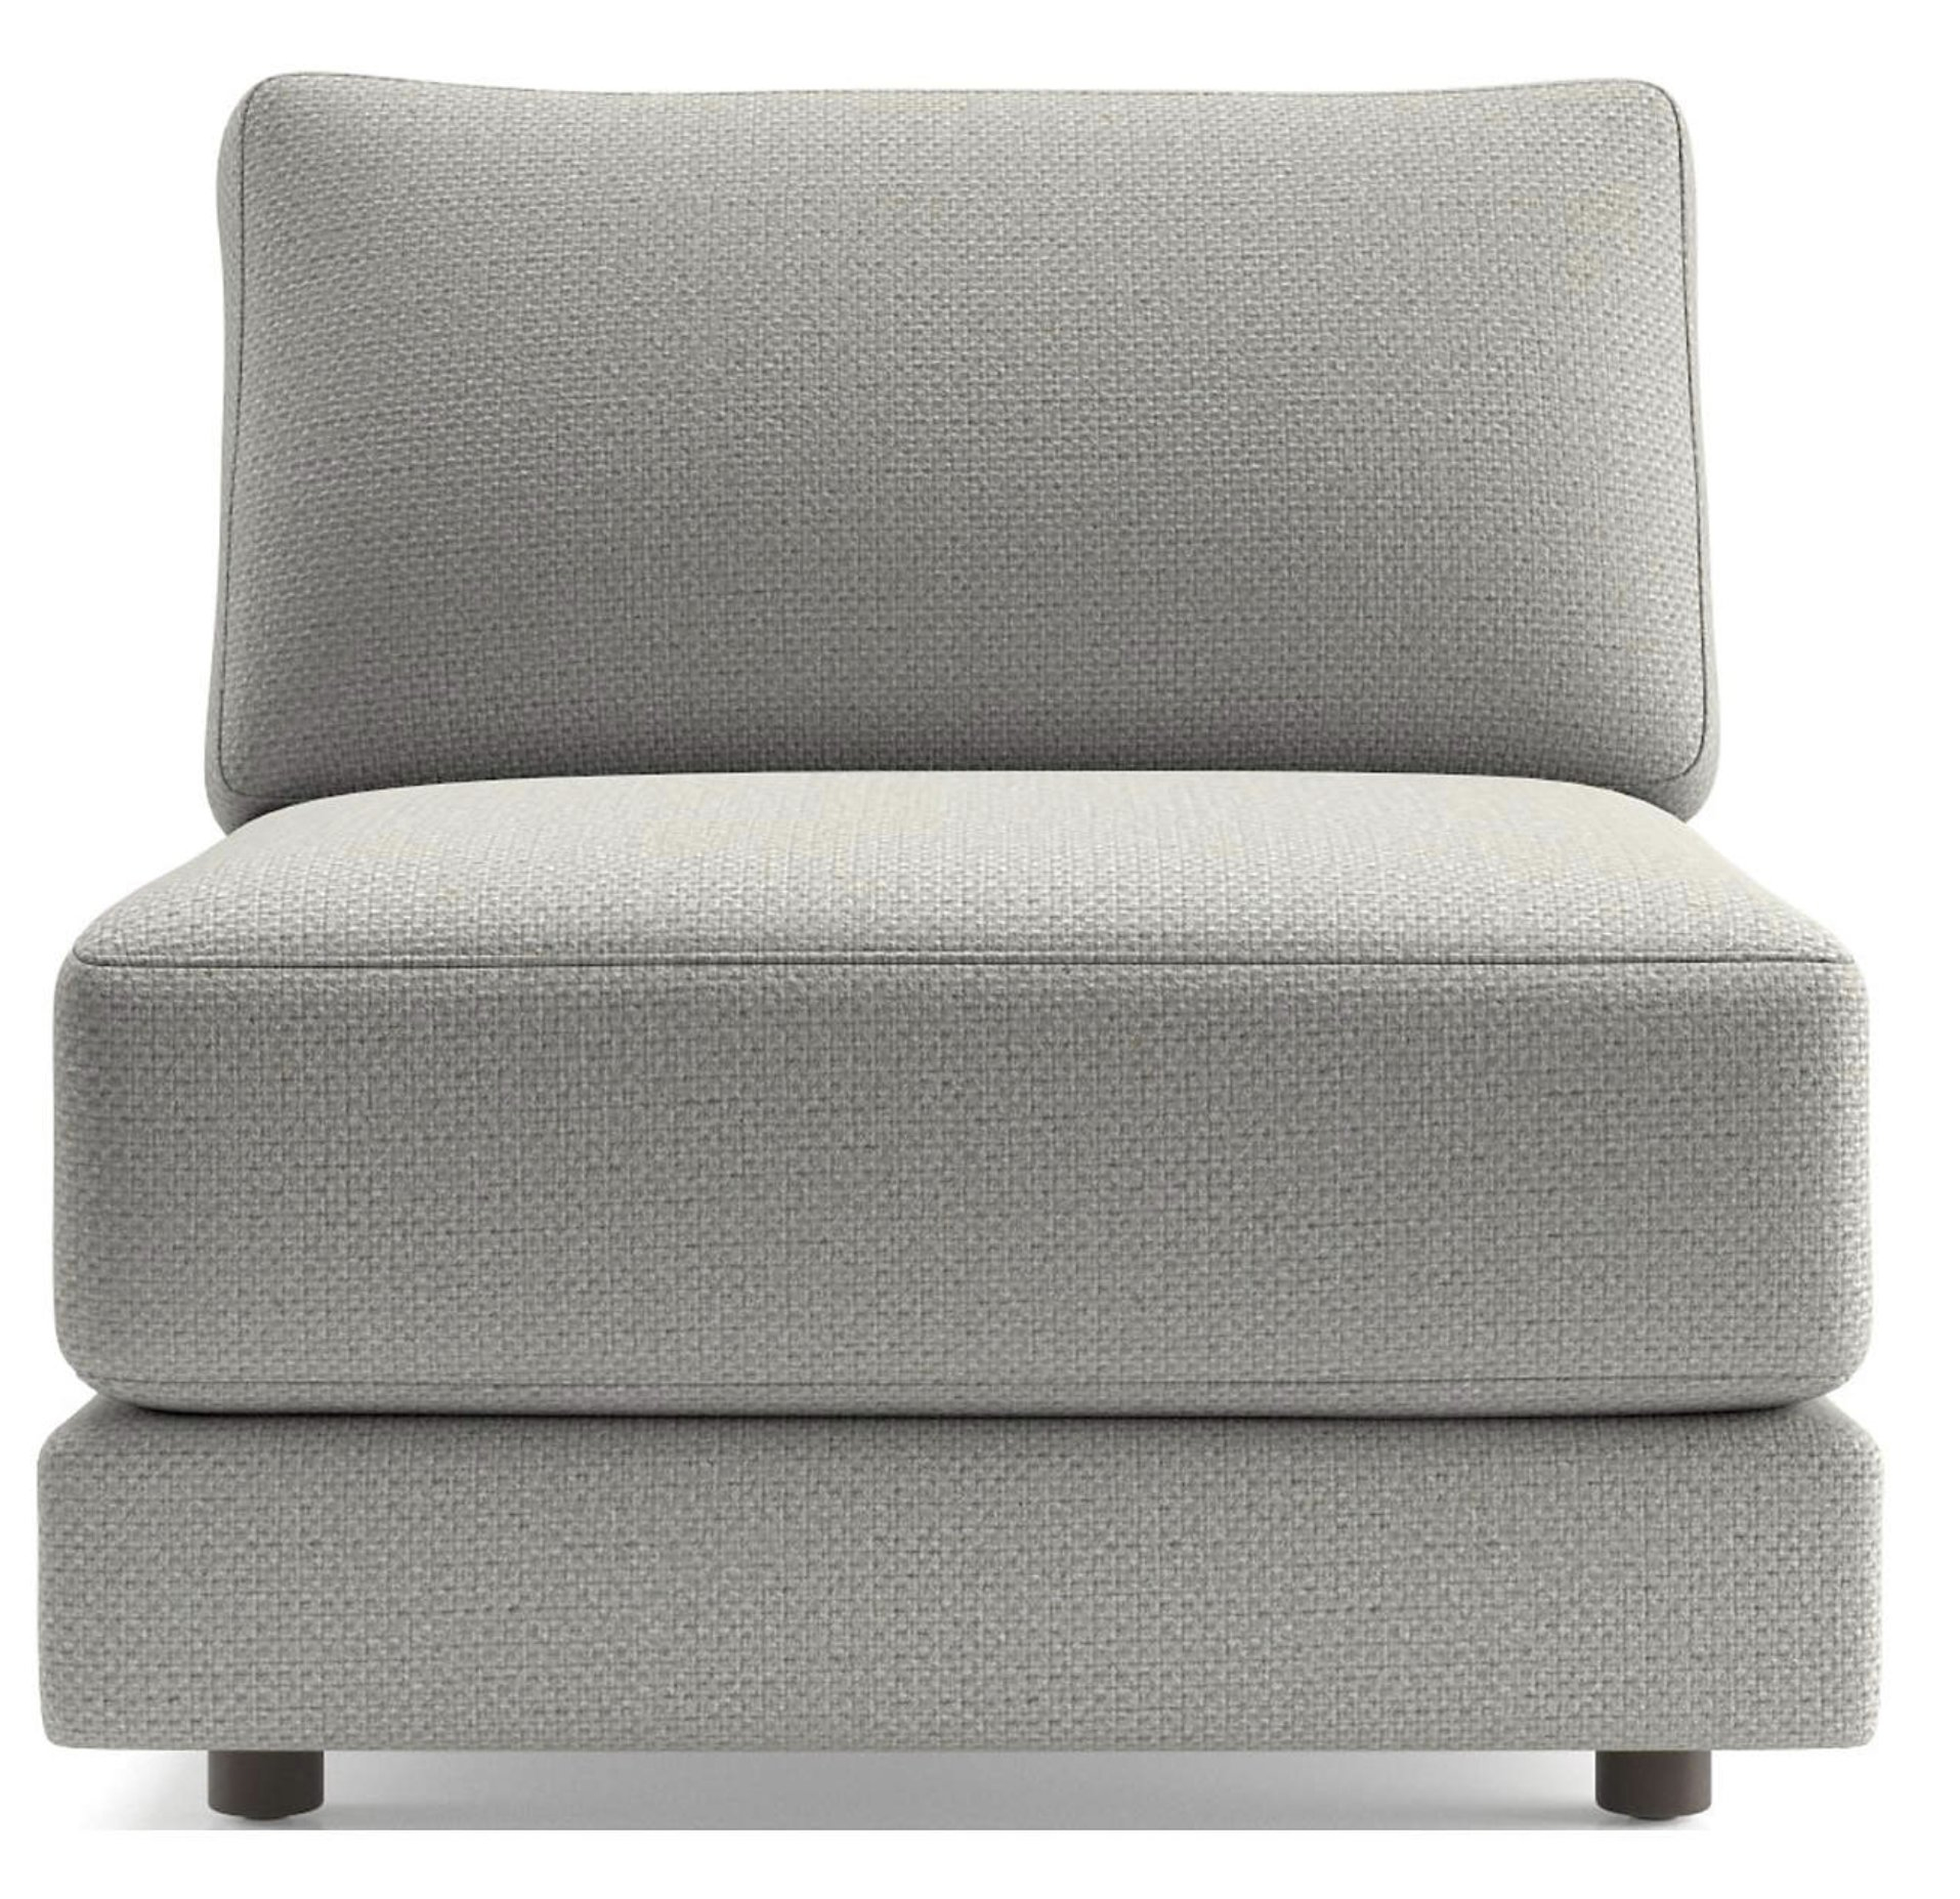 Peyton Armless Chair - Crate and Barrel